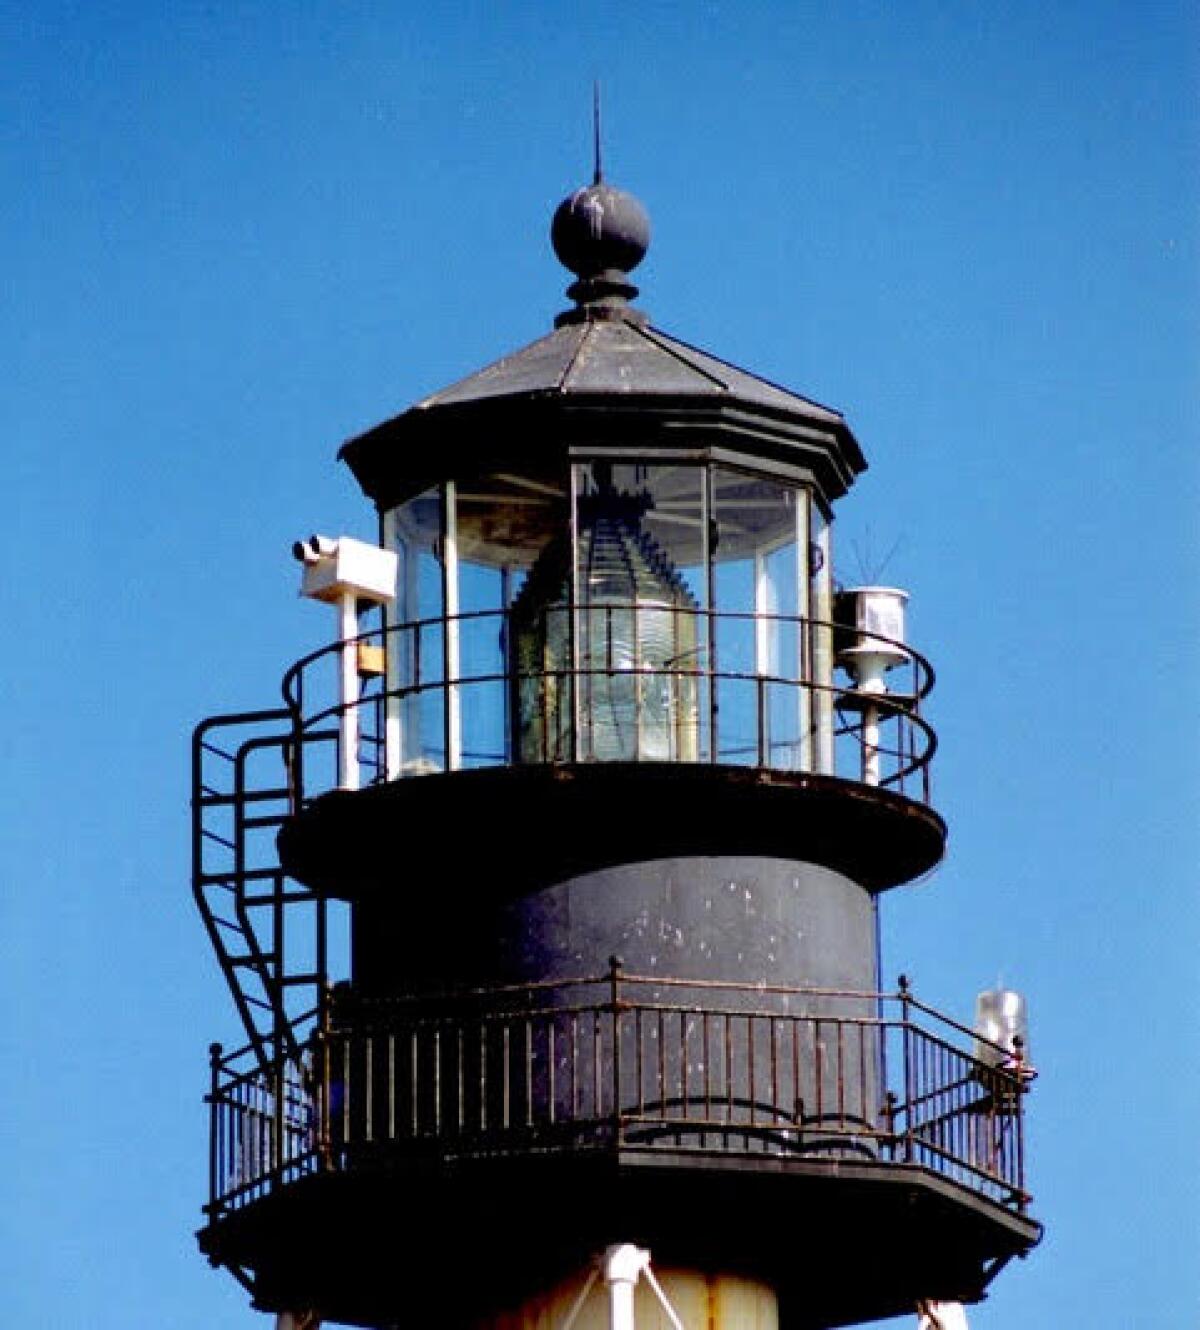 Fresnel lens H-L 329 was removed from the Point Loma light tower in 2001 for safekeeping at Cabrillo National Monument.